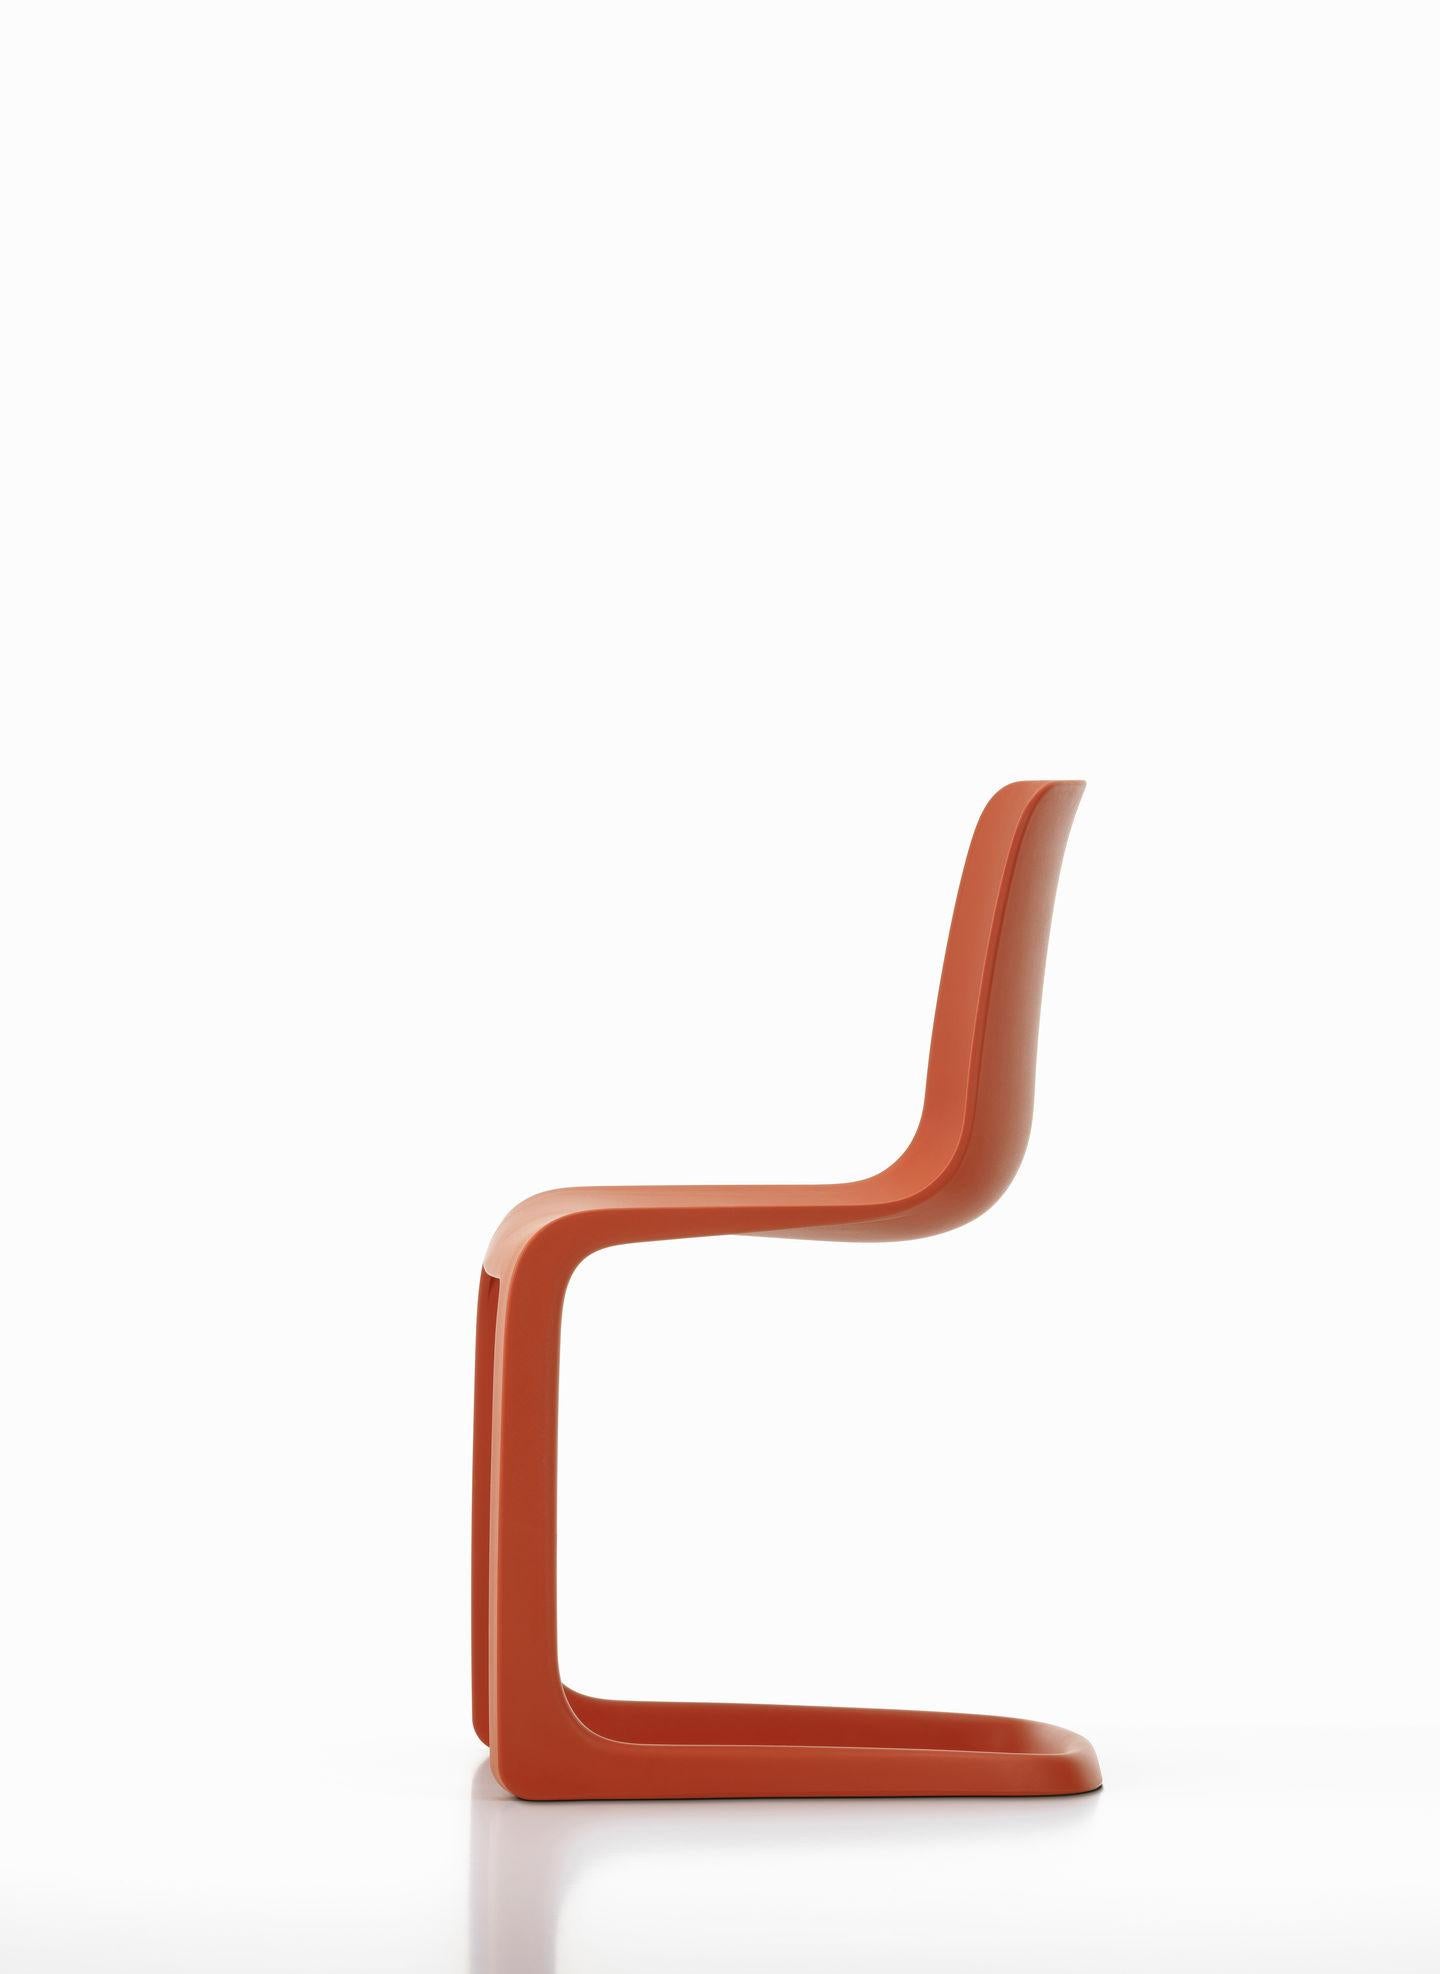 Contemporary Set of Six EVO-C Chair in Recyclable Polypropylene by Jasper Morrison